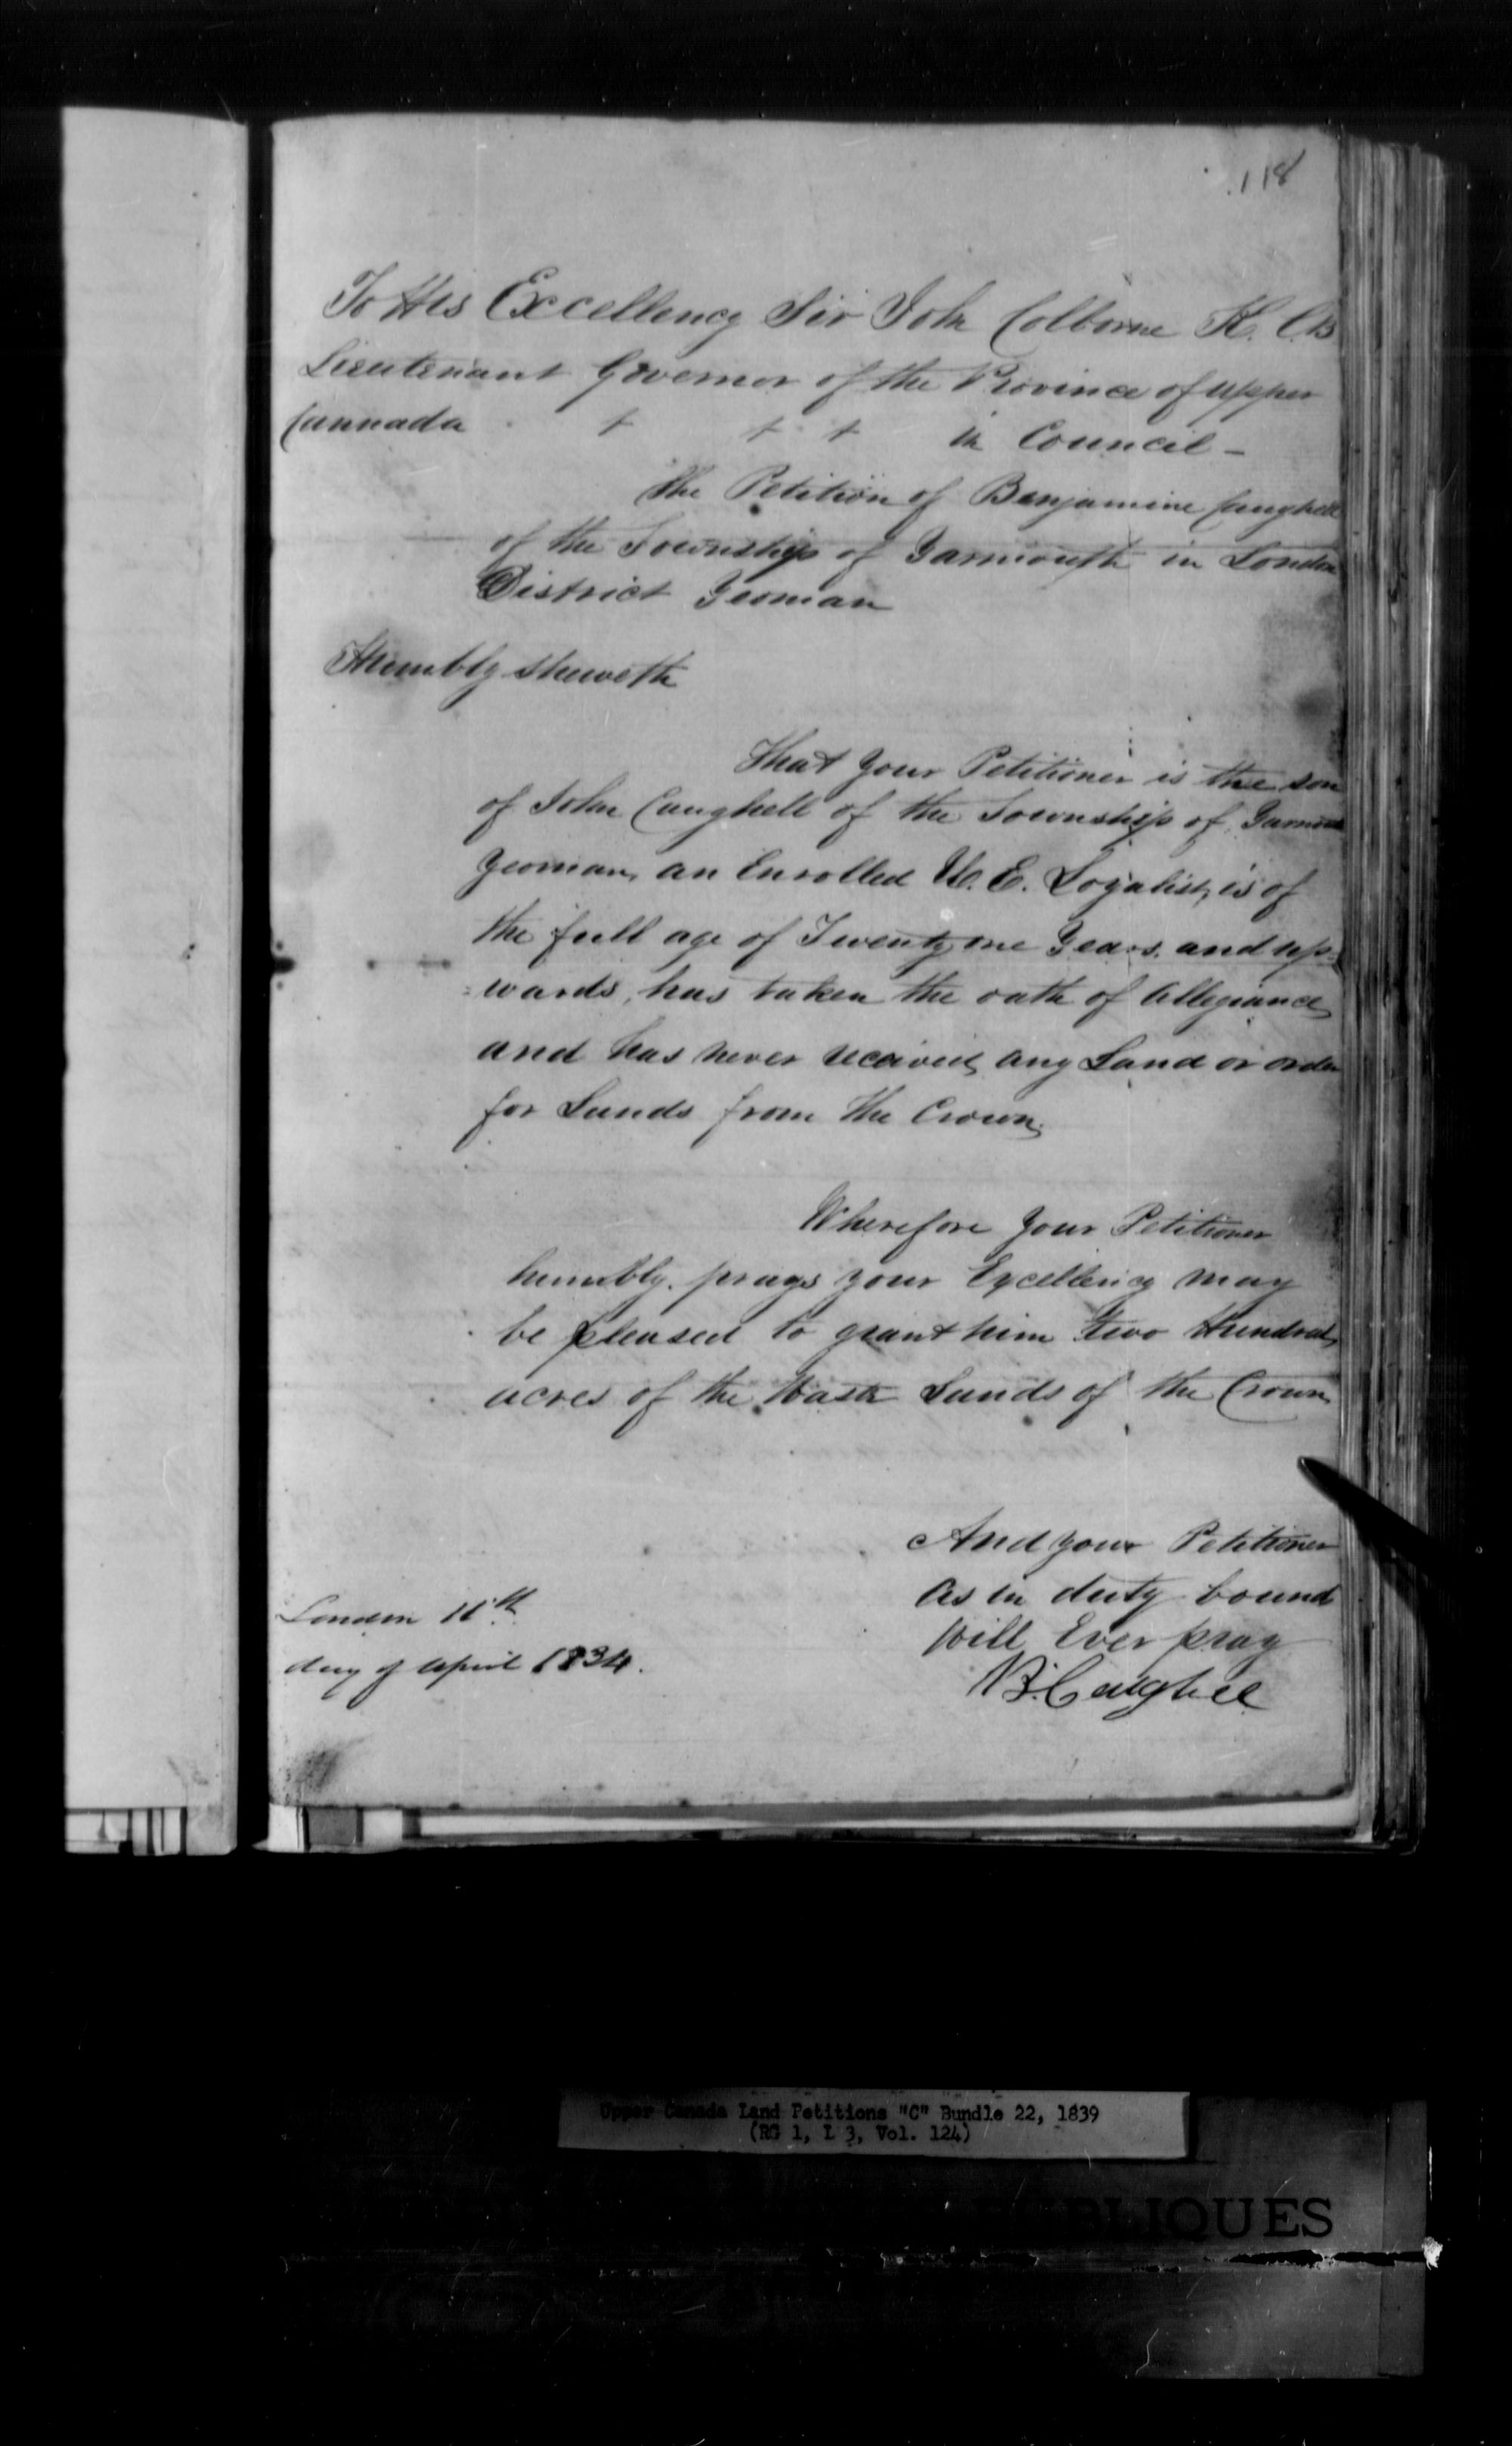 Title: Upper Canada Land Petitions (1763-1865) - Mikan Number: 205131 - Microform: c-1731